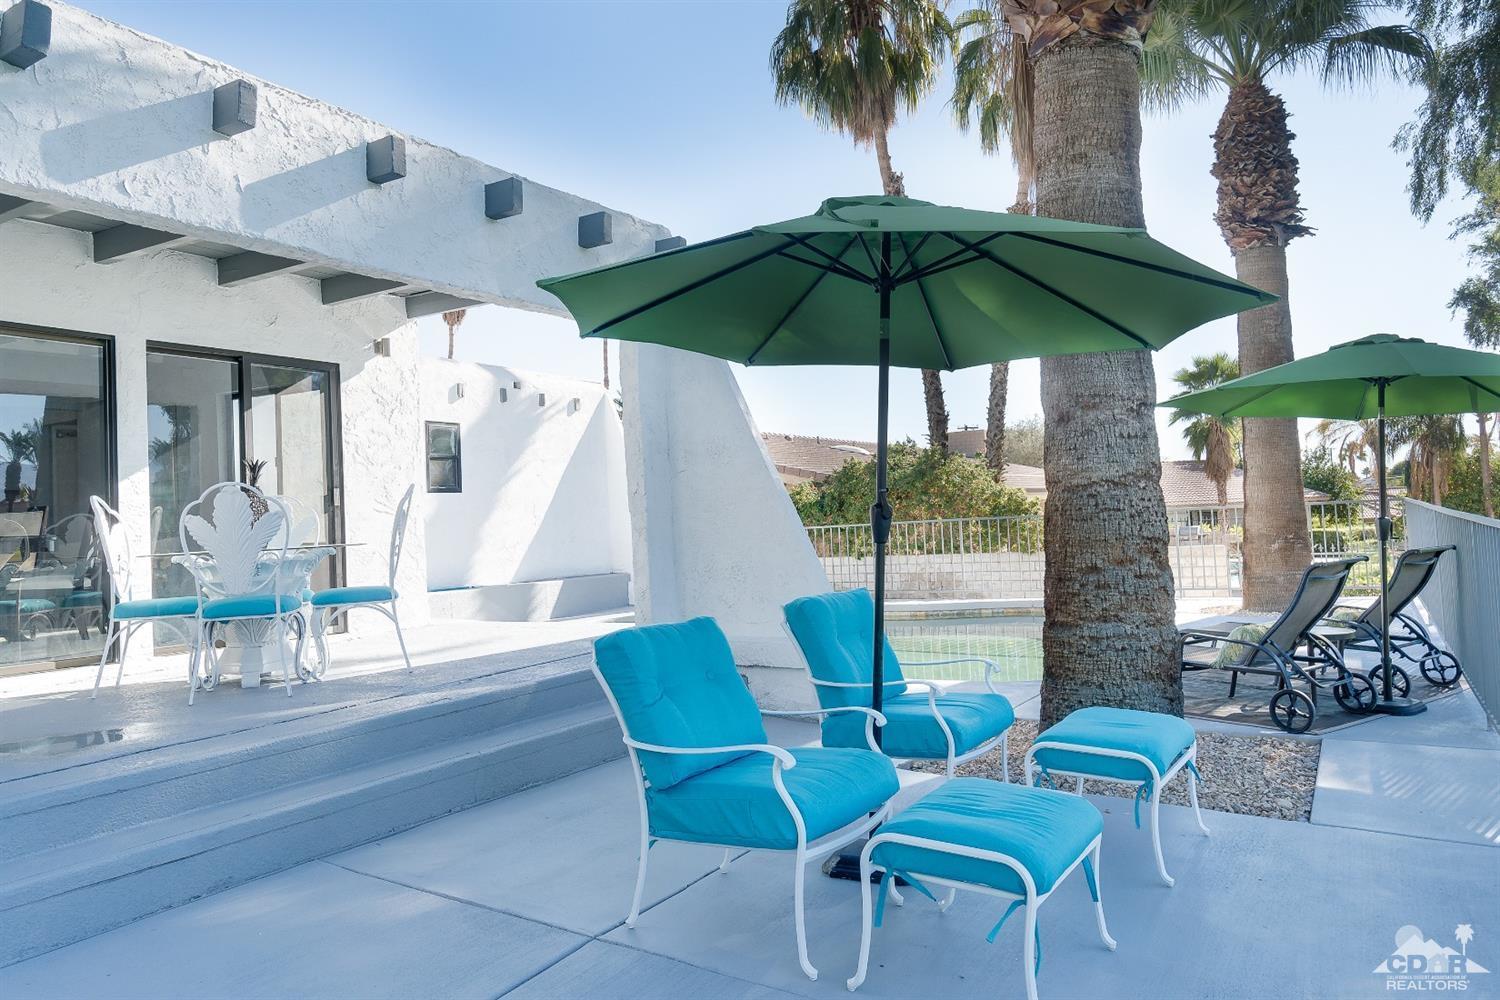 a view of an outdoor space with furniture and umbrella